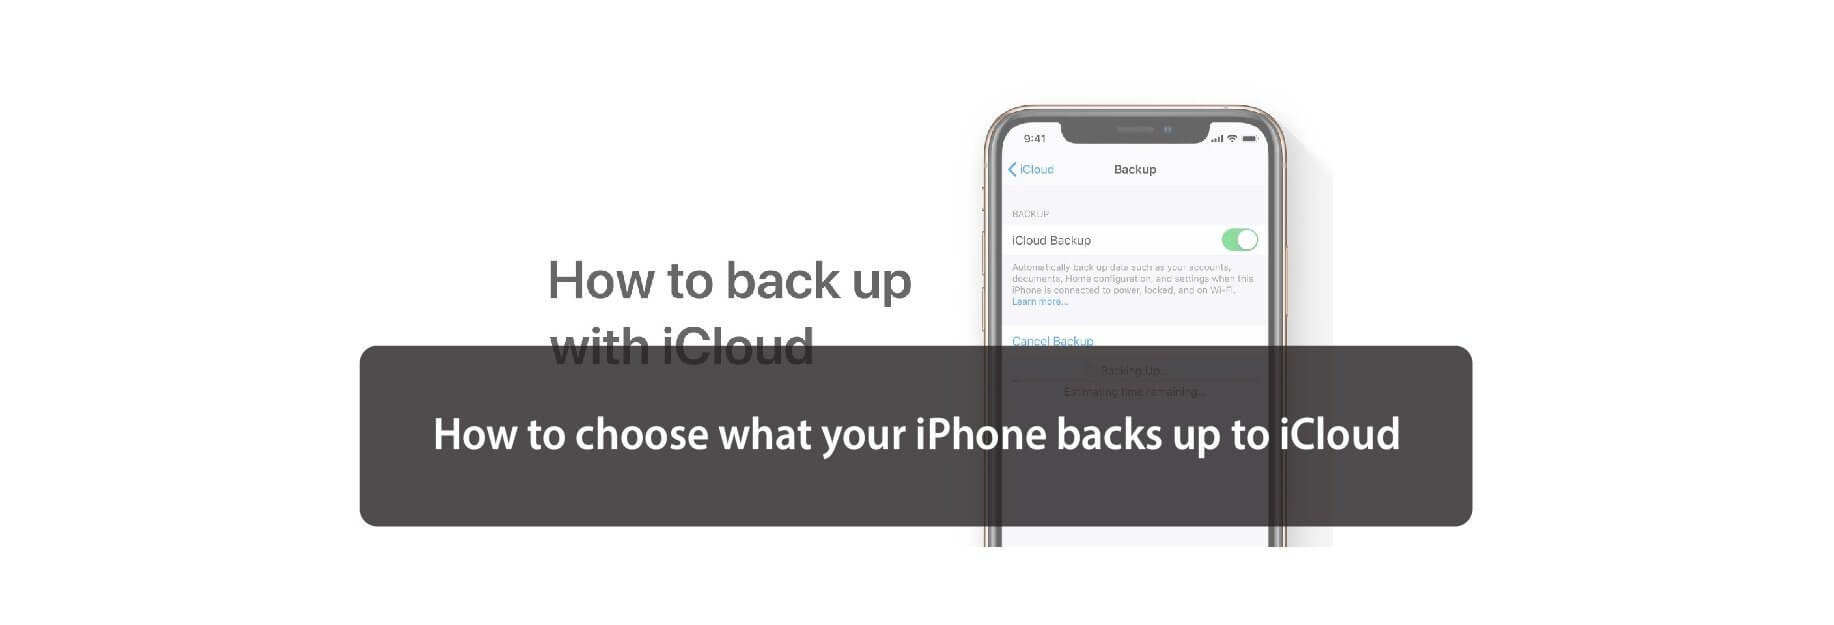 How to choose what your iPhone backs up to iCloud